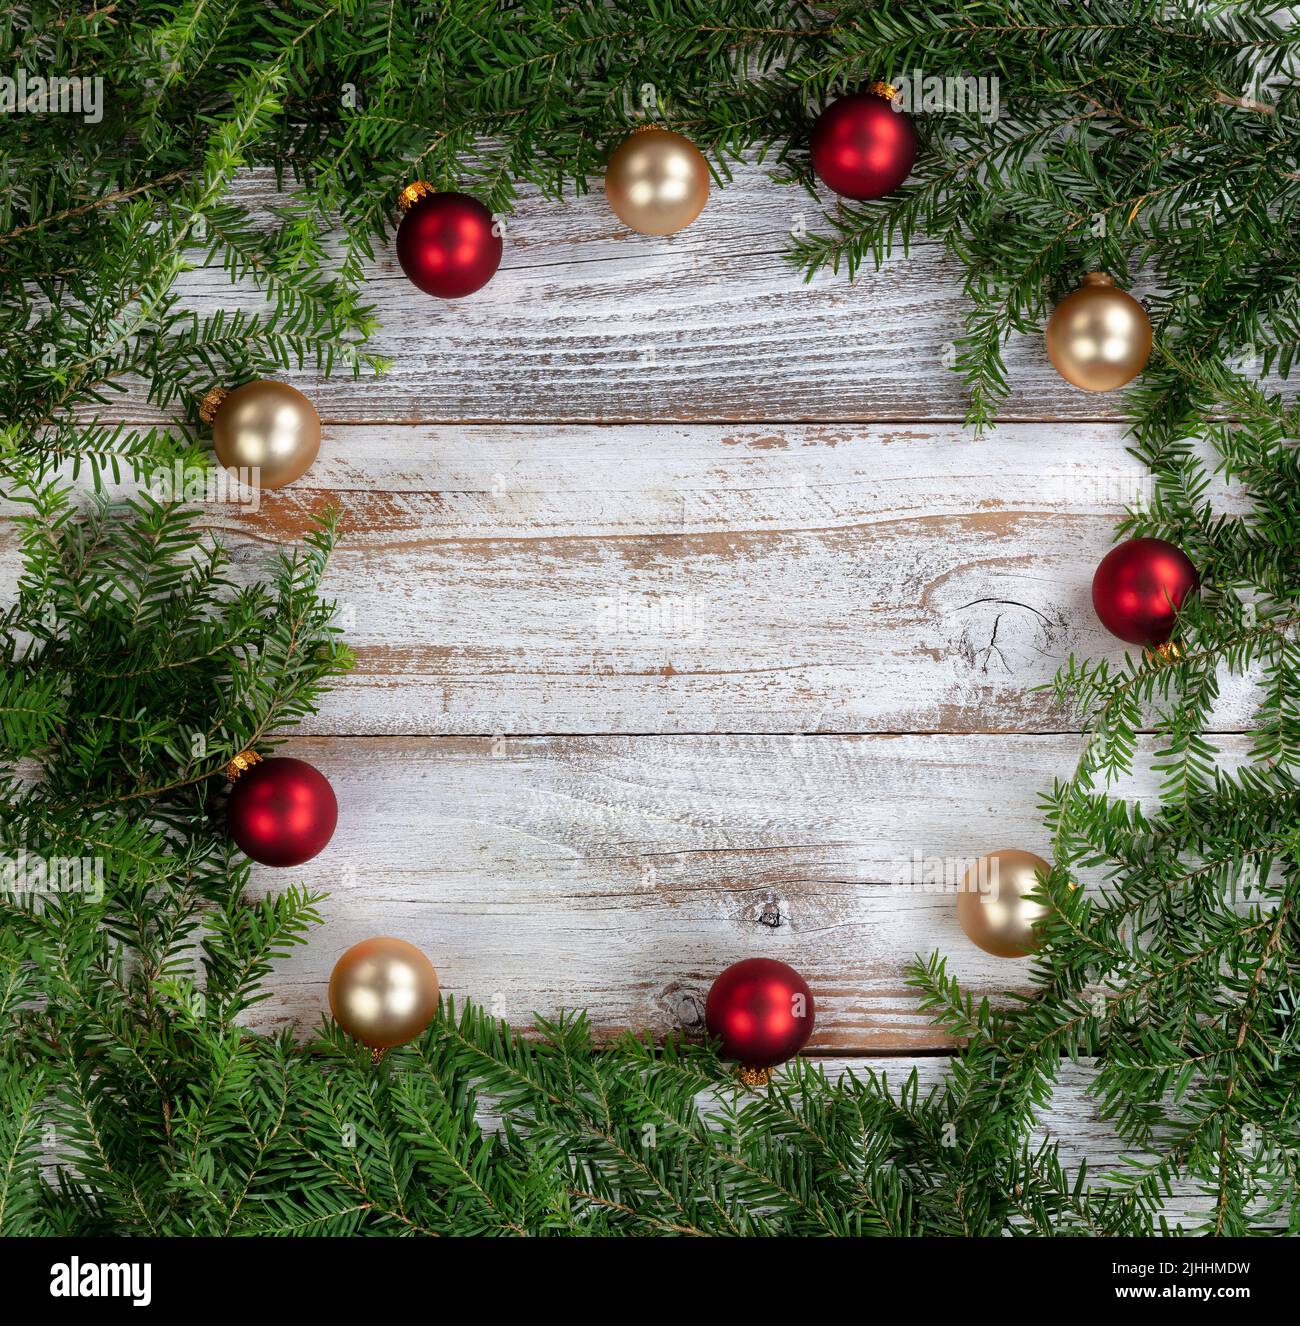 Real fir wreath with gold and red ball ornaments on white rustic wood for the Christmas or New Year holiday concept Stock Photo